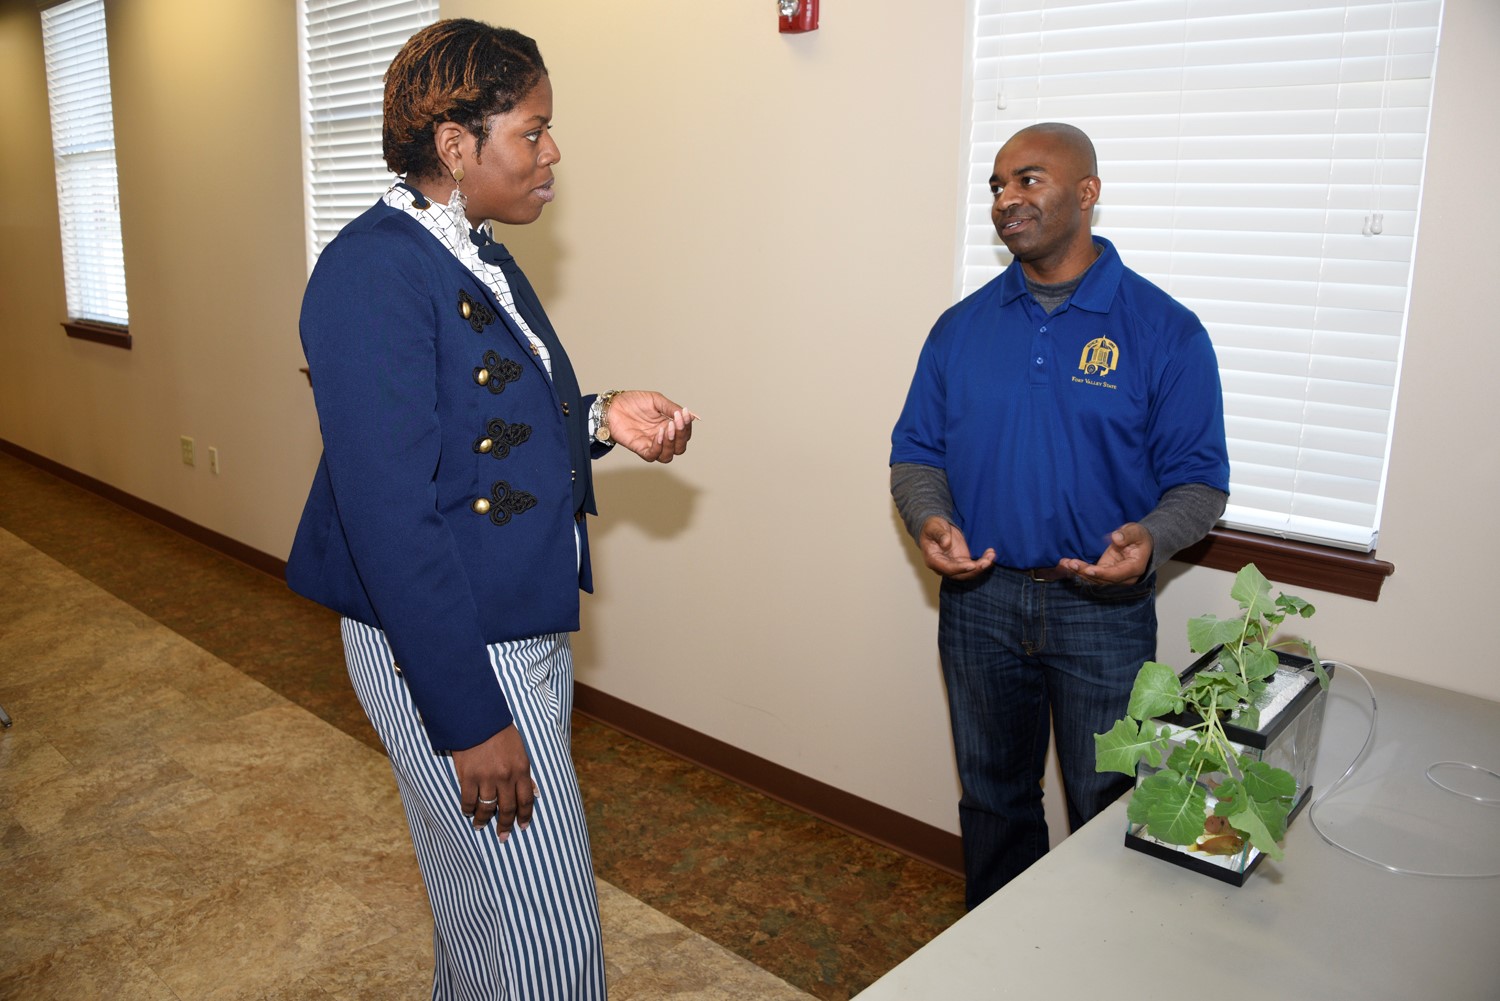 Donald Bacoat (right), Fort Valley State University’s aquaculture and production assistant, explains the basics of aquaculture to Shakeena Reeves (left), a junior agricultural economics major, during the Water Safety and Conservation Workshop at the Agricultural Technology Conference Center on Jan. 15.